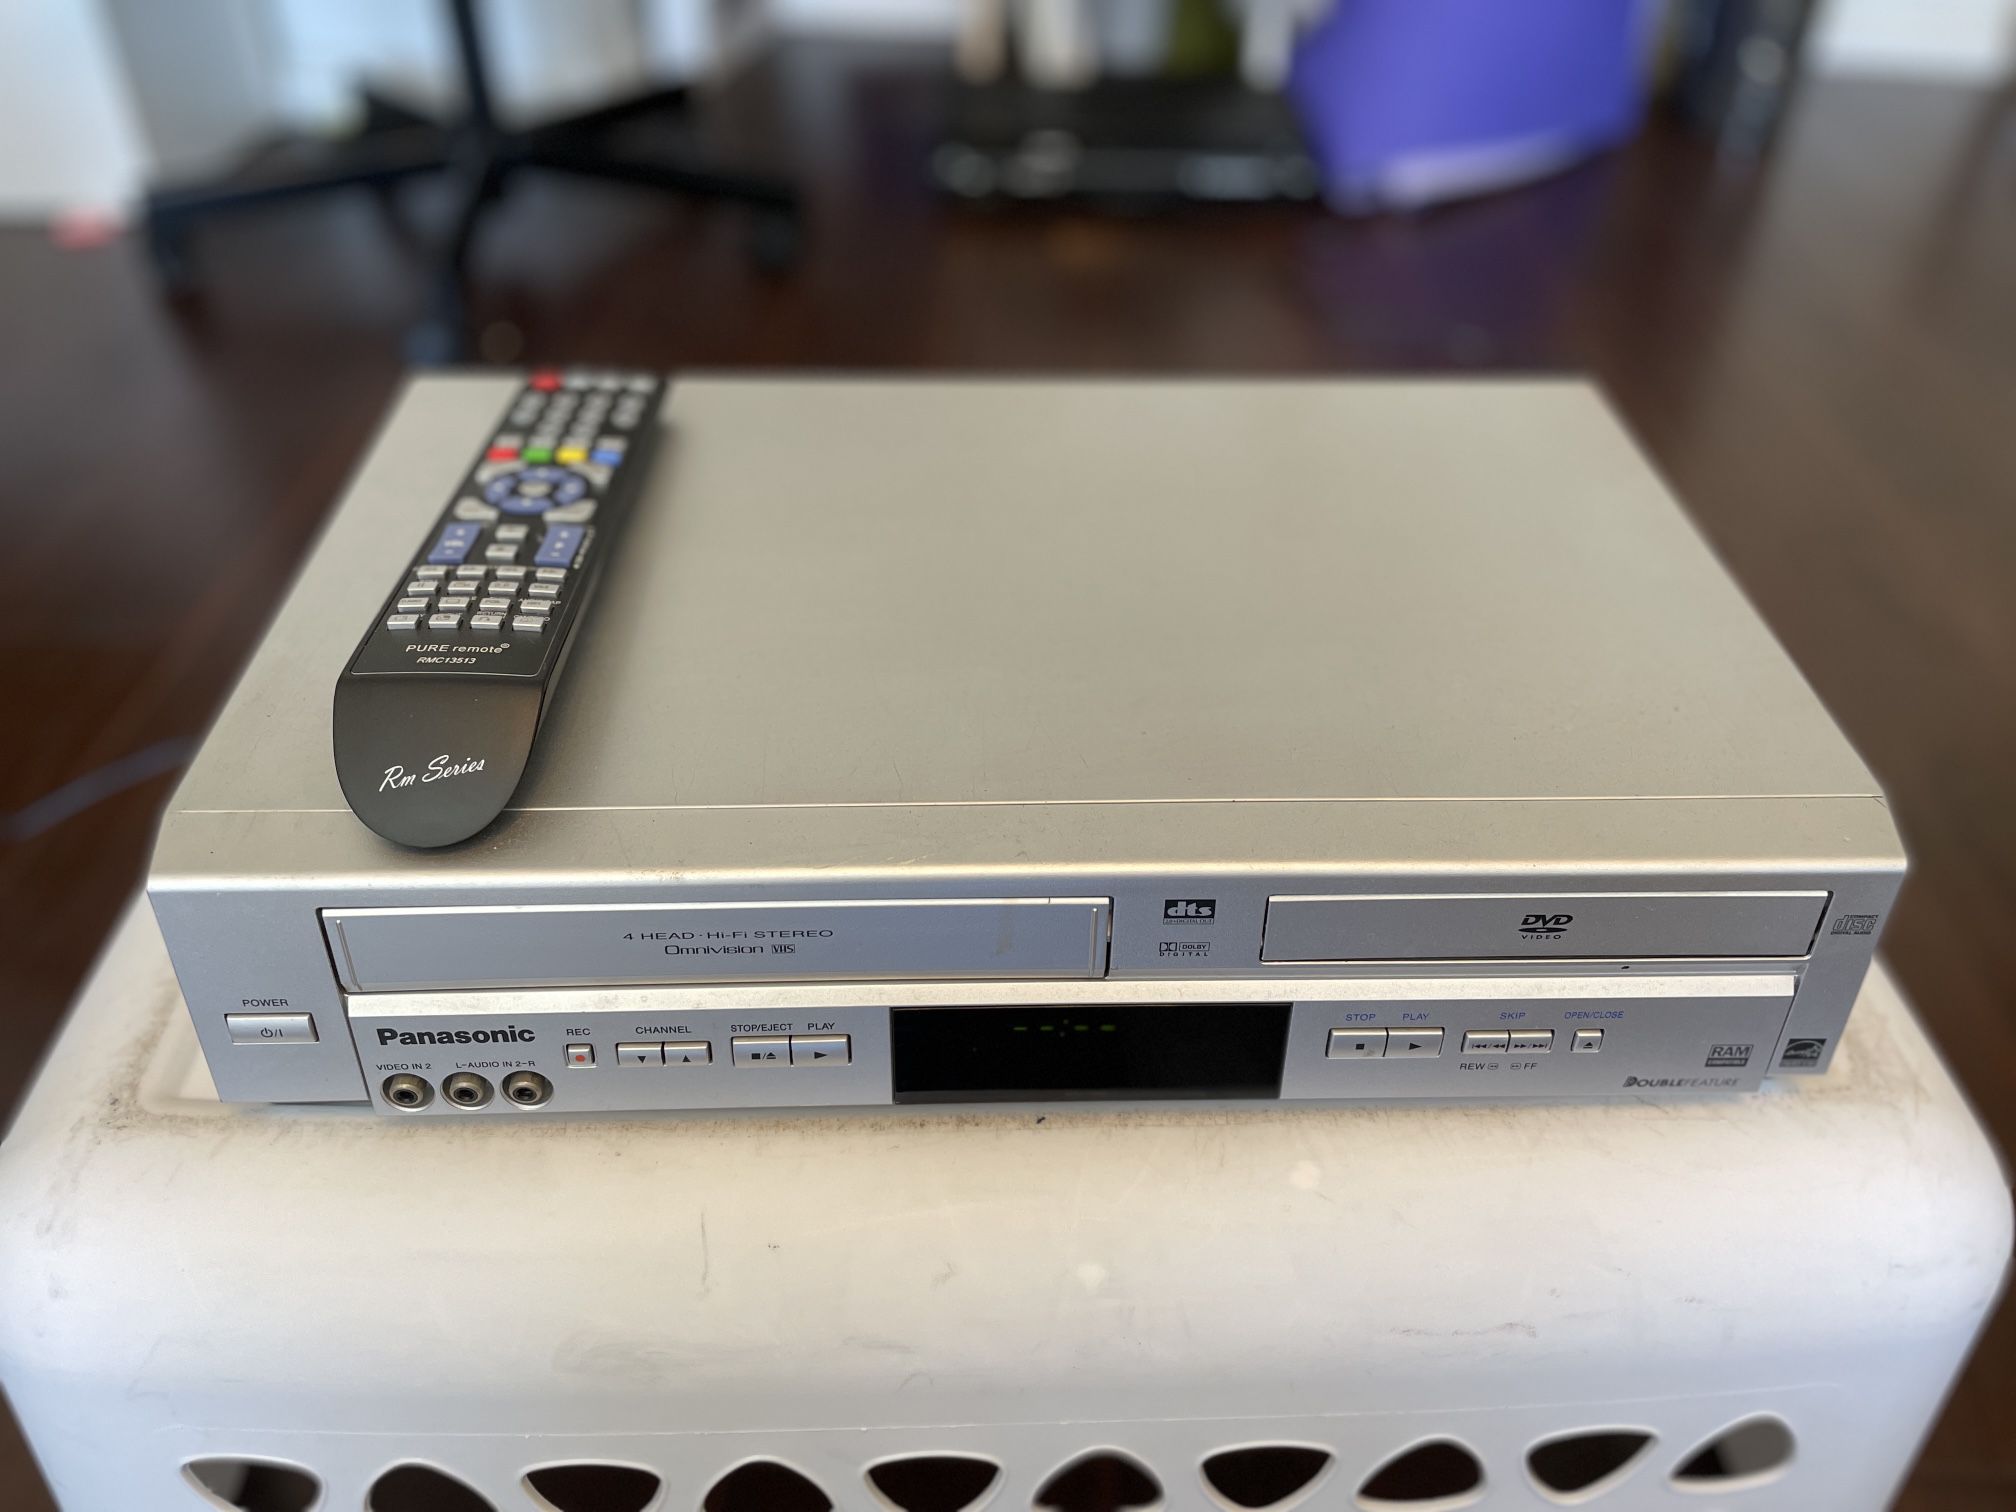 VCR/DVD Player + Remote - Working